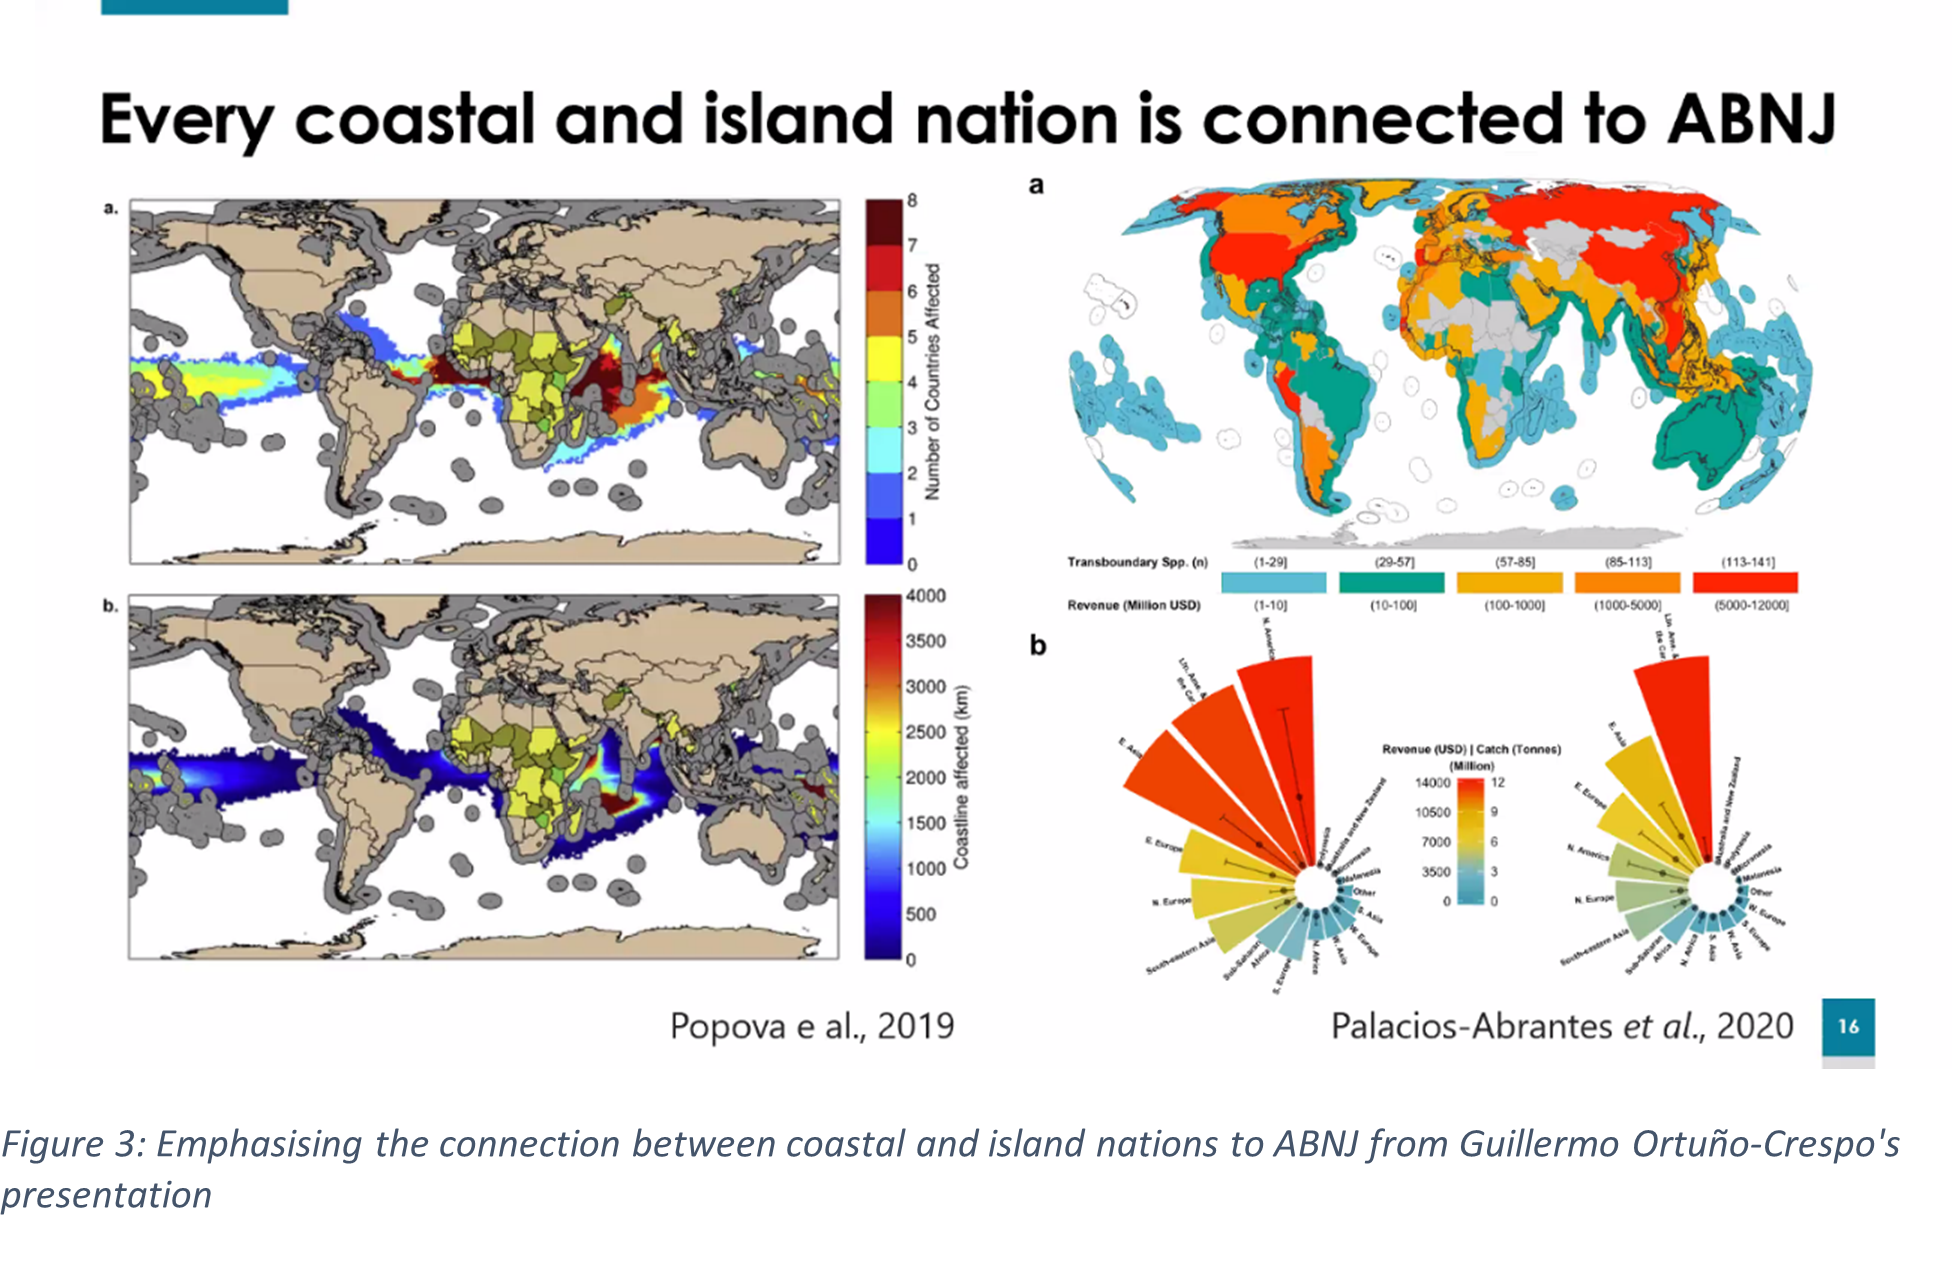 Figure 3: Emphasising the connection between coastal and island nations to ABNJ from Guillermo Ortuño-Crespo's presentation